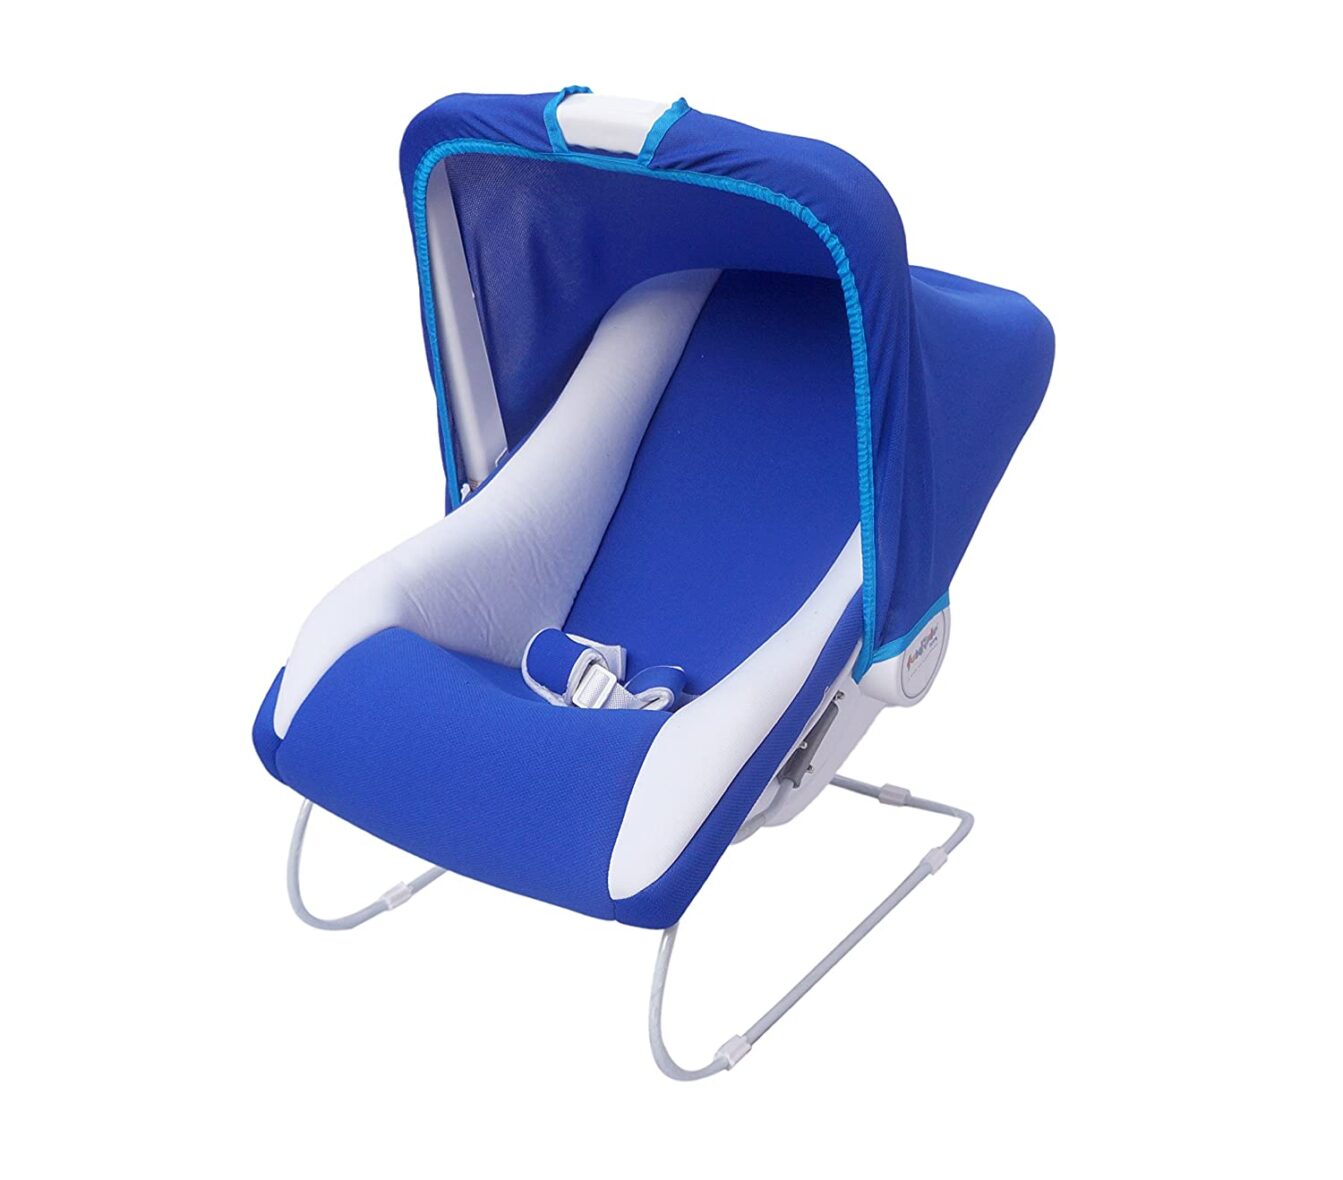 U Smile Carry Cot Cum Bouncer – 10 in 1 – Feeding Chair, Baby Chair, Rocker, Bath TUB, Carrying, Bouncer, Bottle Holder & Baby Swing (Blue)